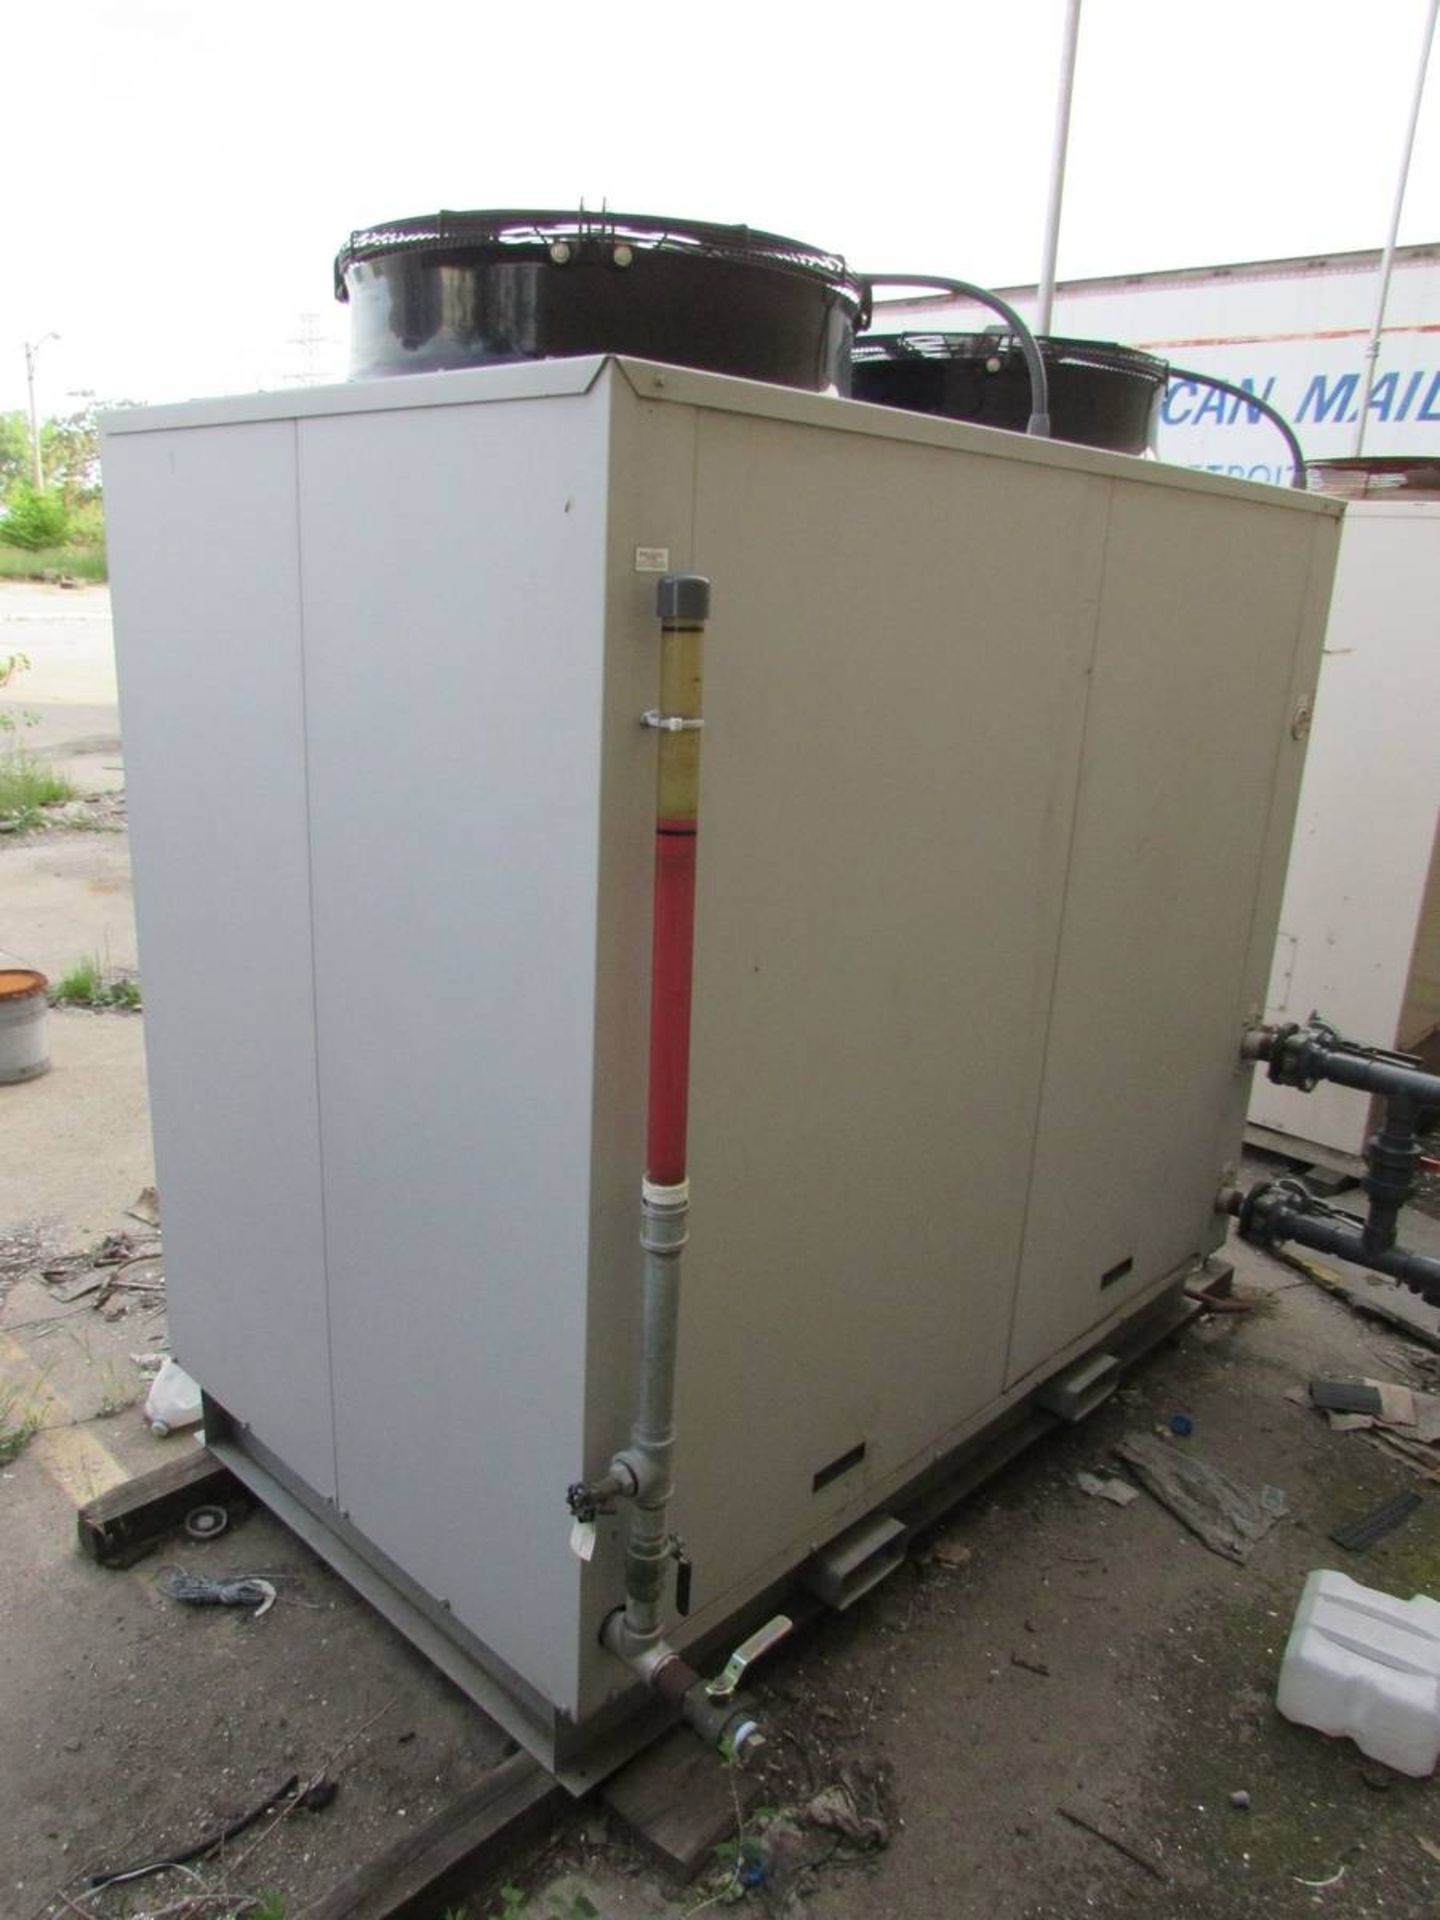 Fluid Chillers Inc AIR 3500 Refrigerated Chiller - Image 4 of 7